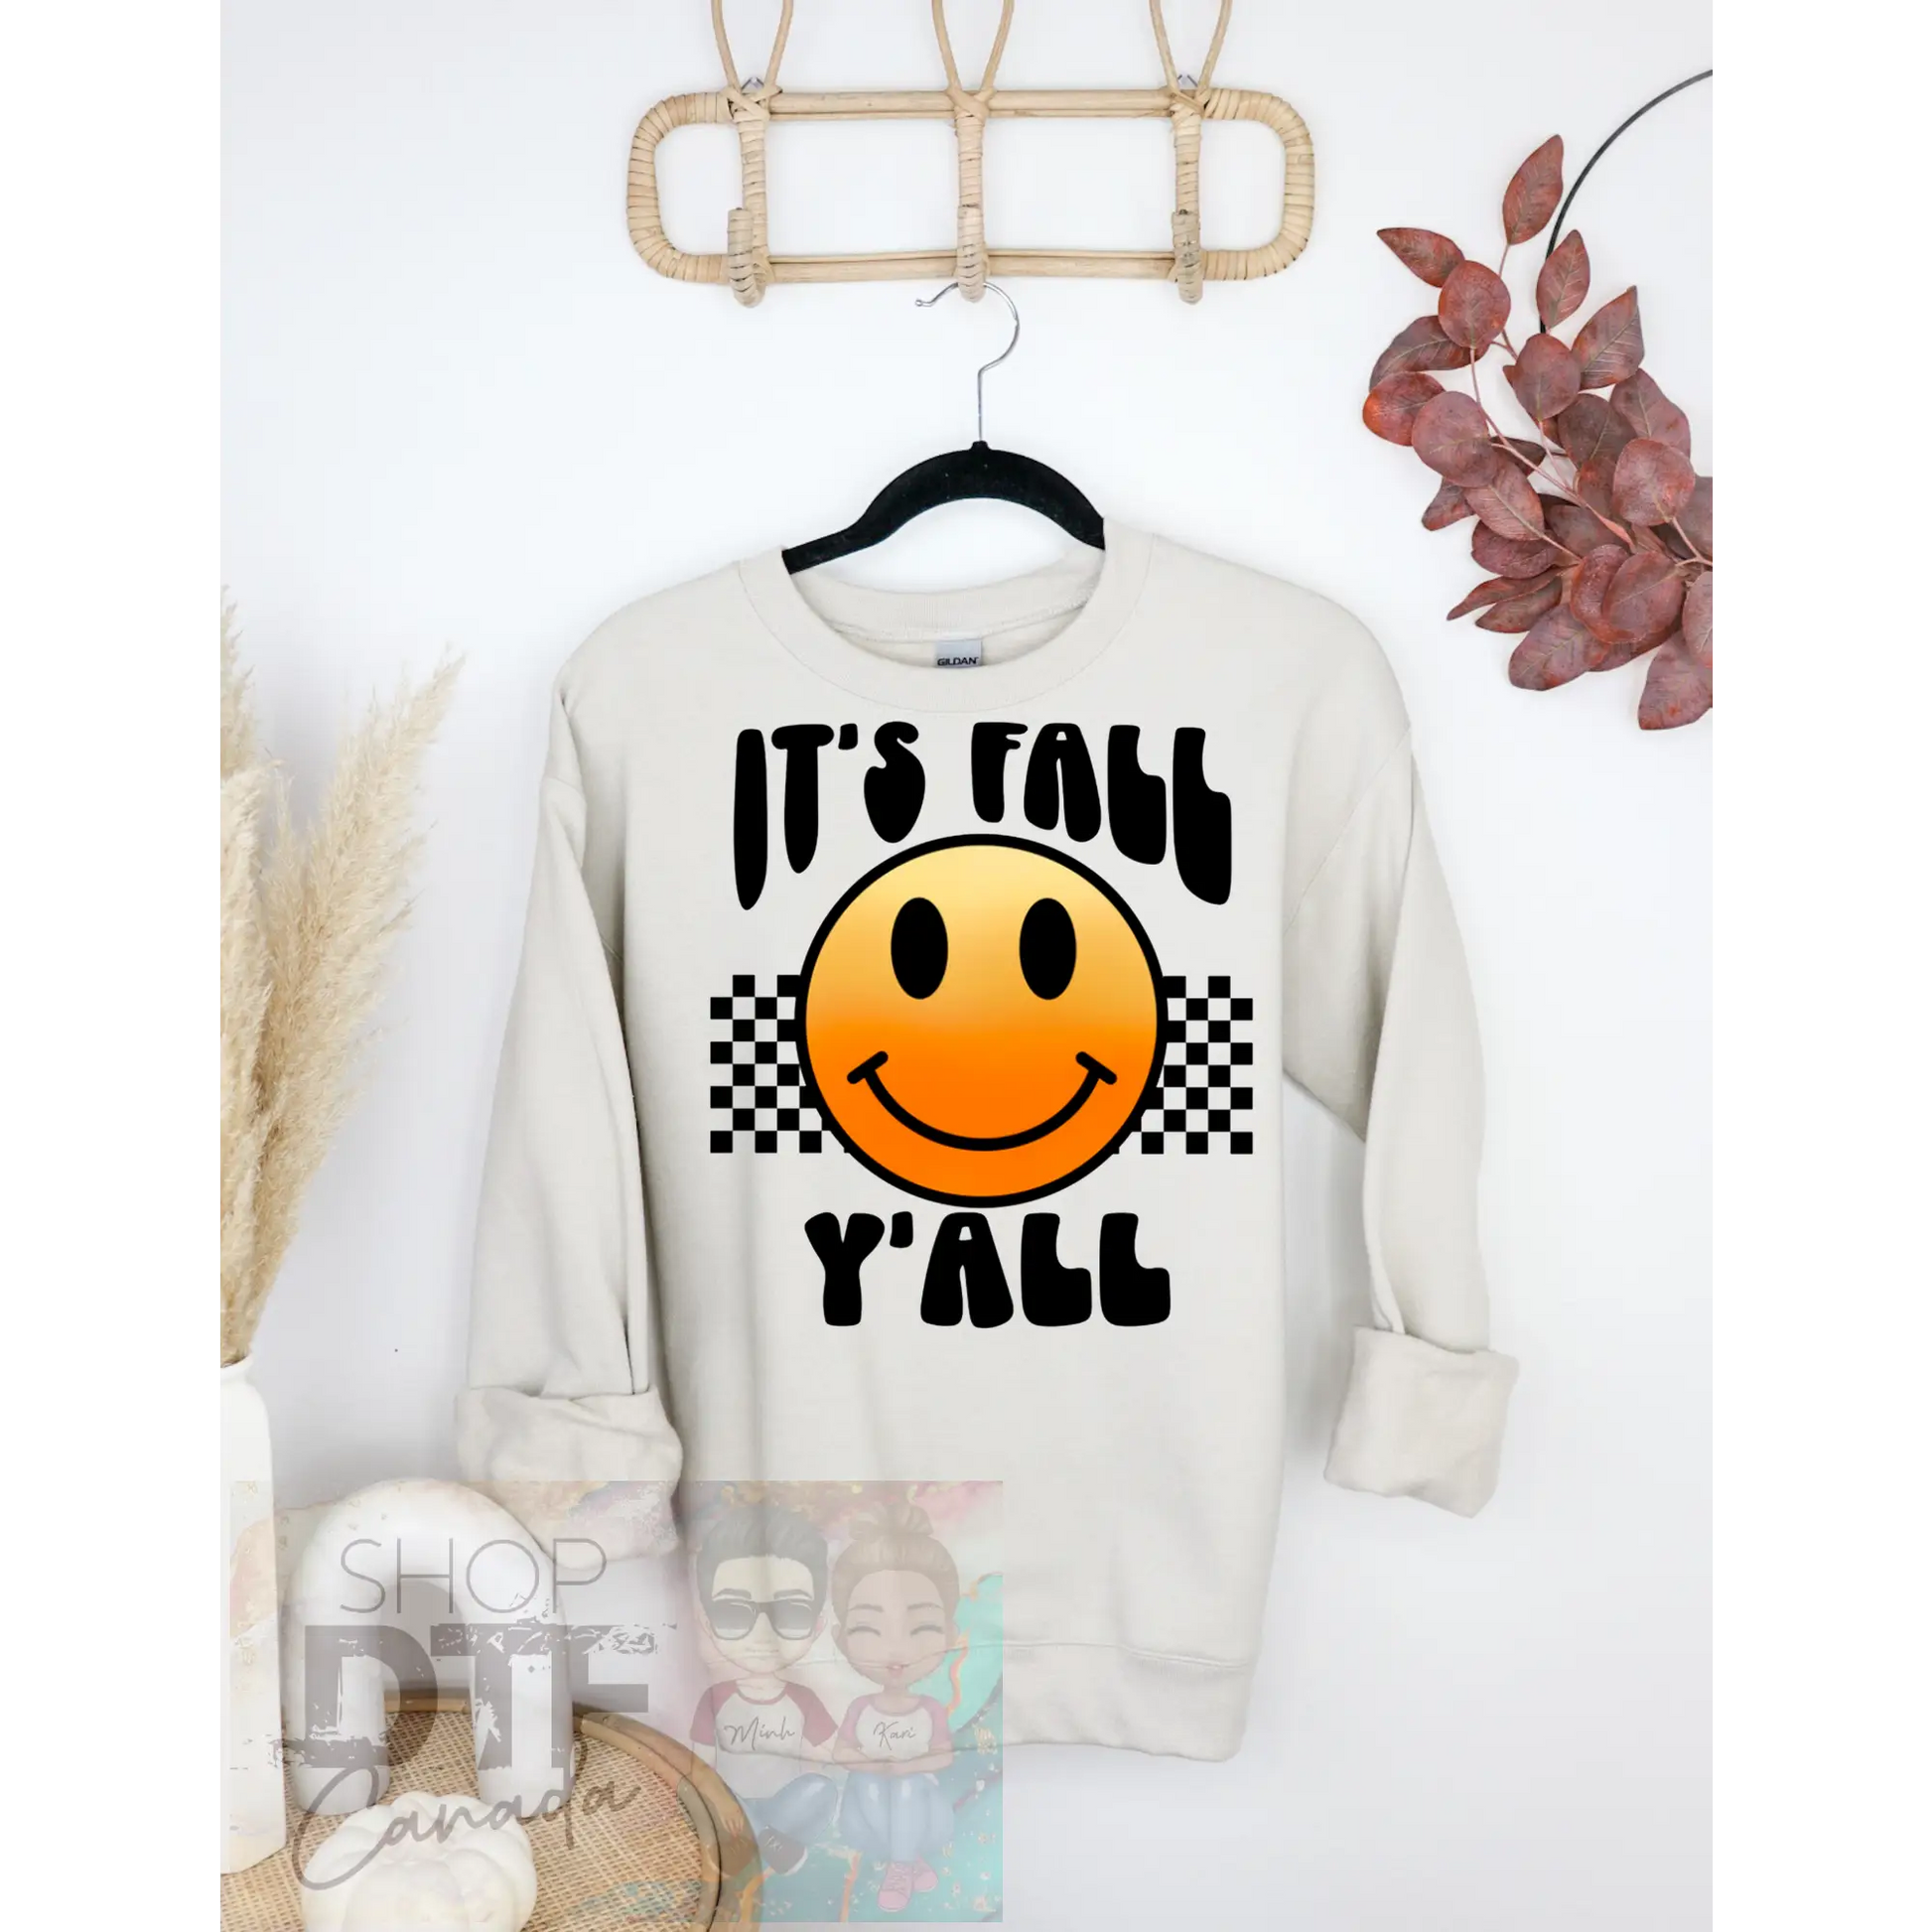 Fall - It’s all Fall Y’all - Shirts & Tops